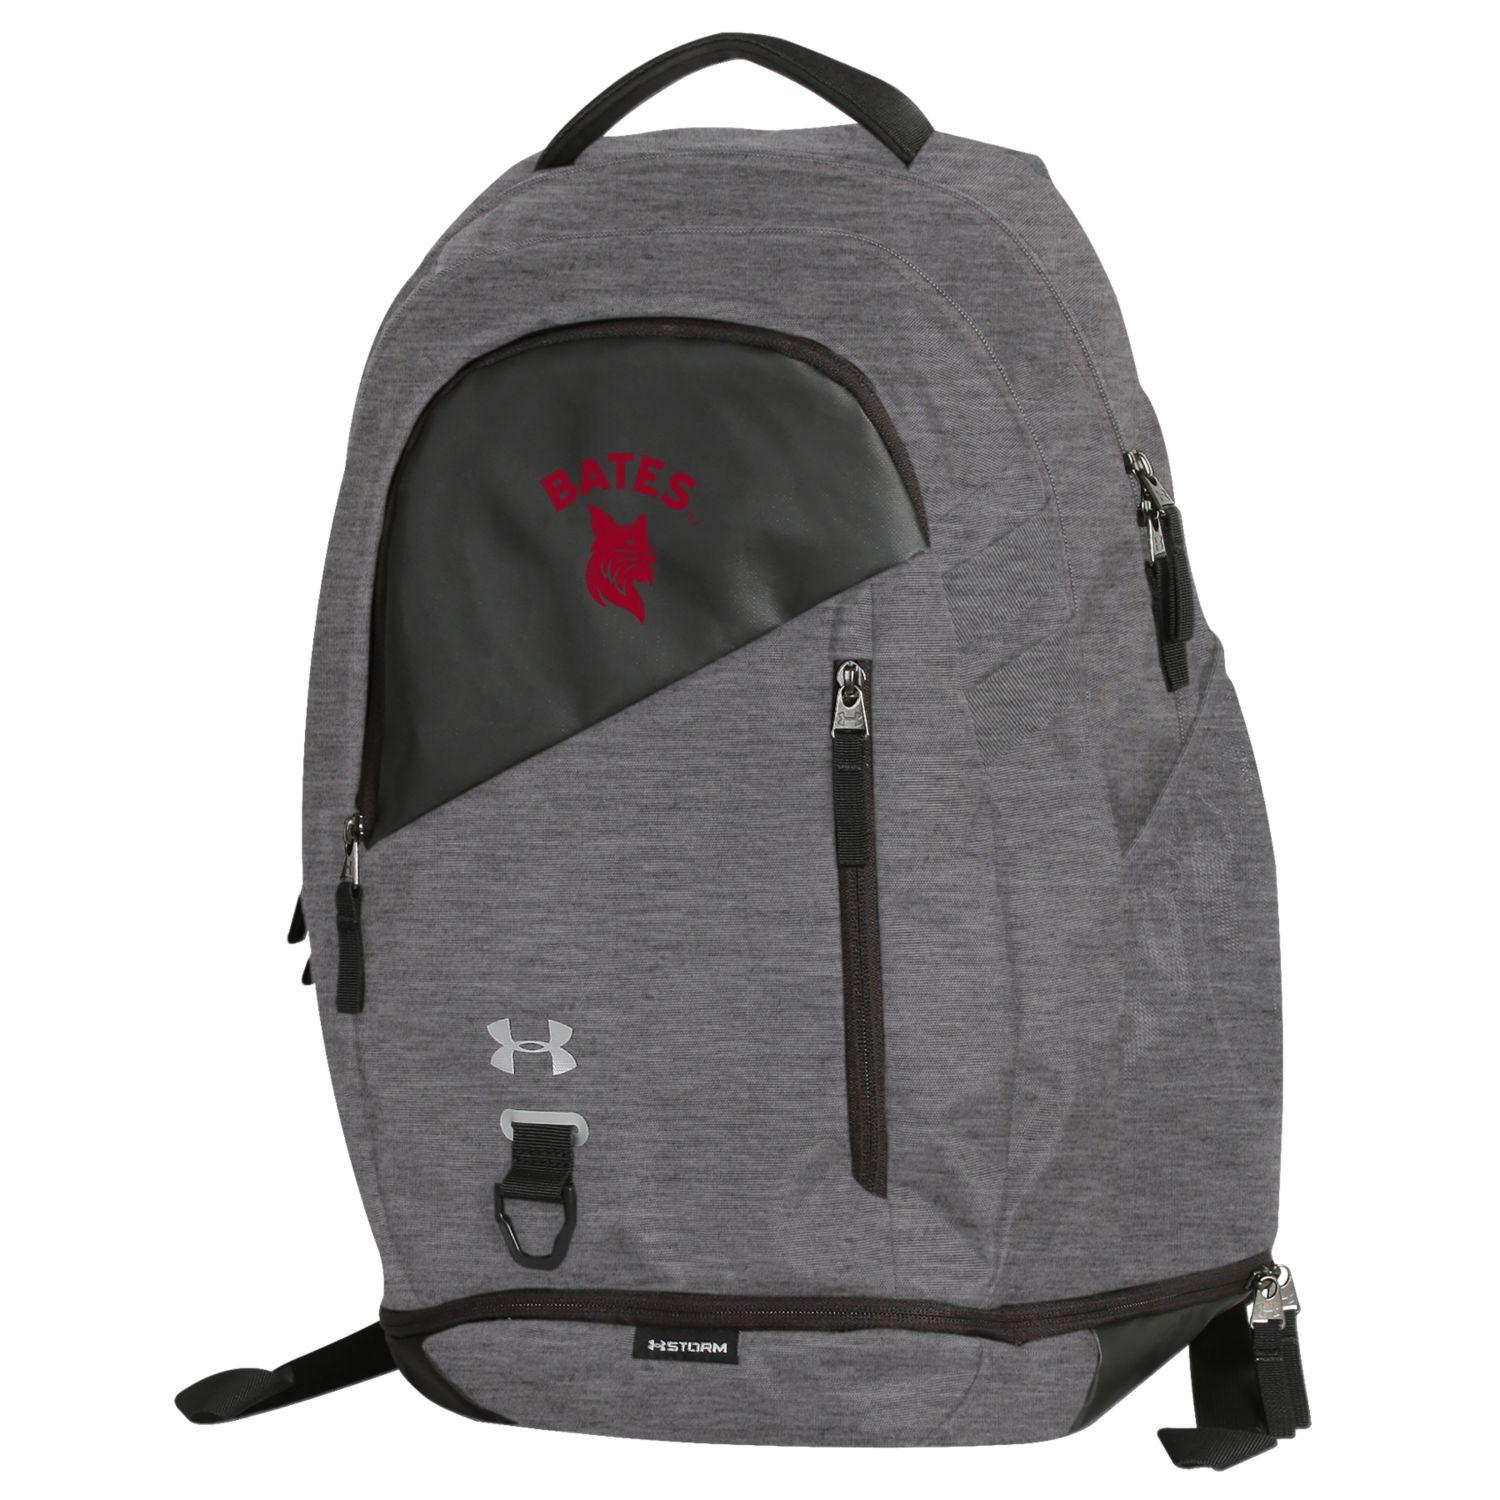 UA Storm: For the Rain - Bags and Backpacks